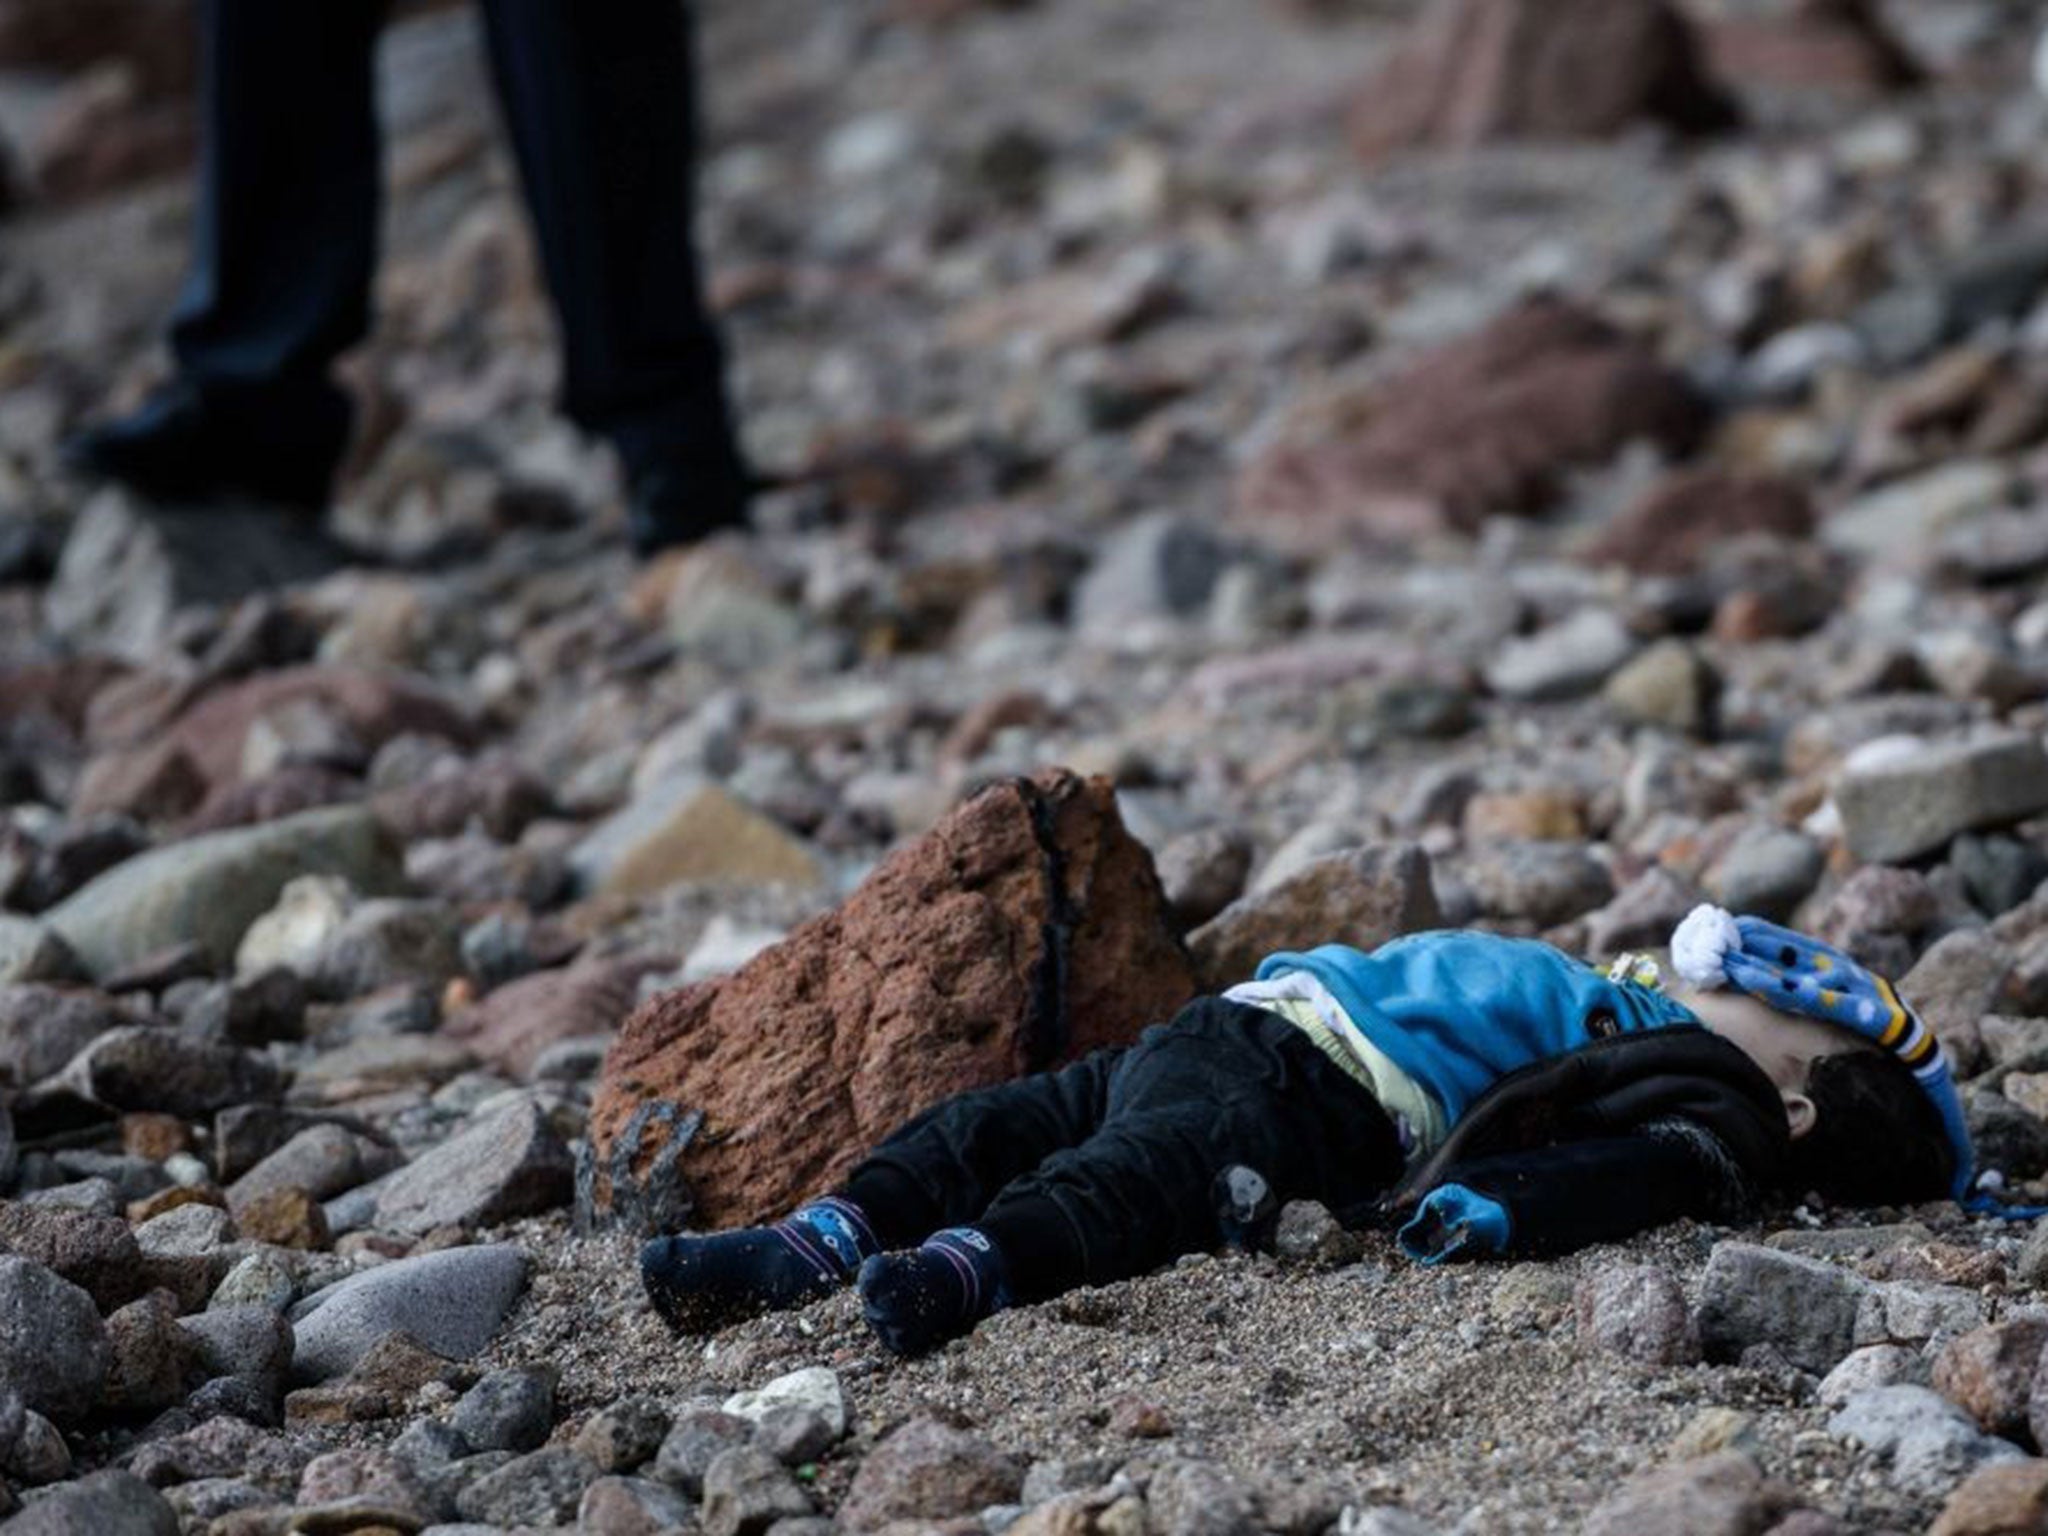 A man stands by the body of a refugee child washed up on a beach in Canakkale's Bademli district on January 30, 2016